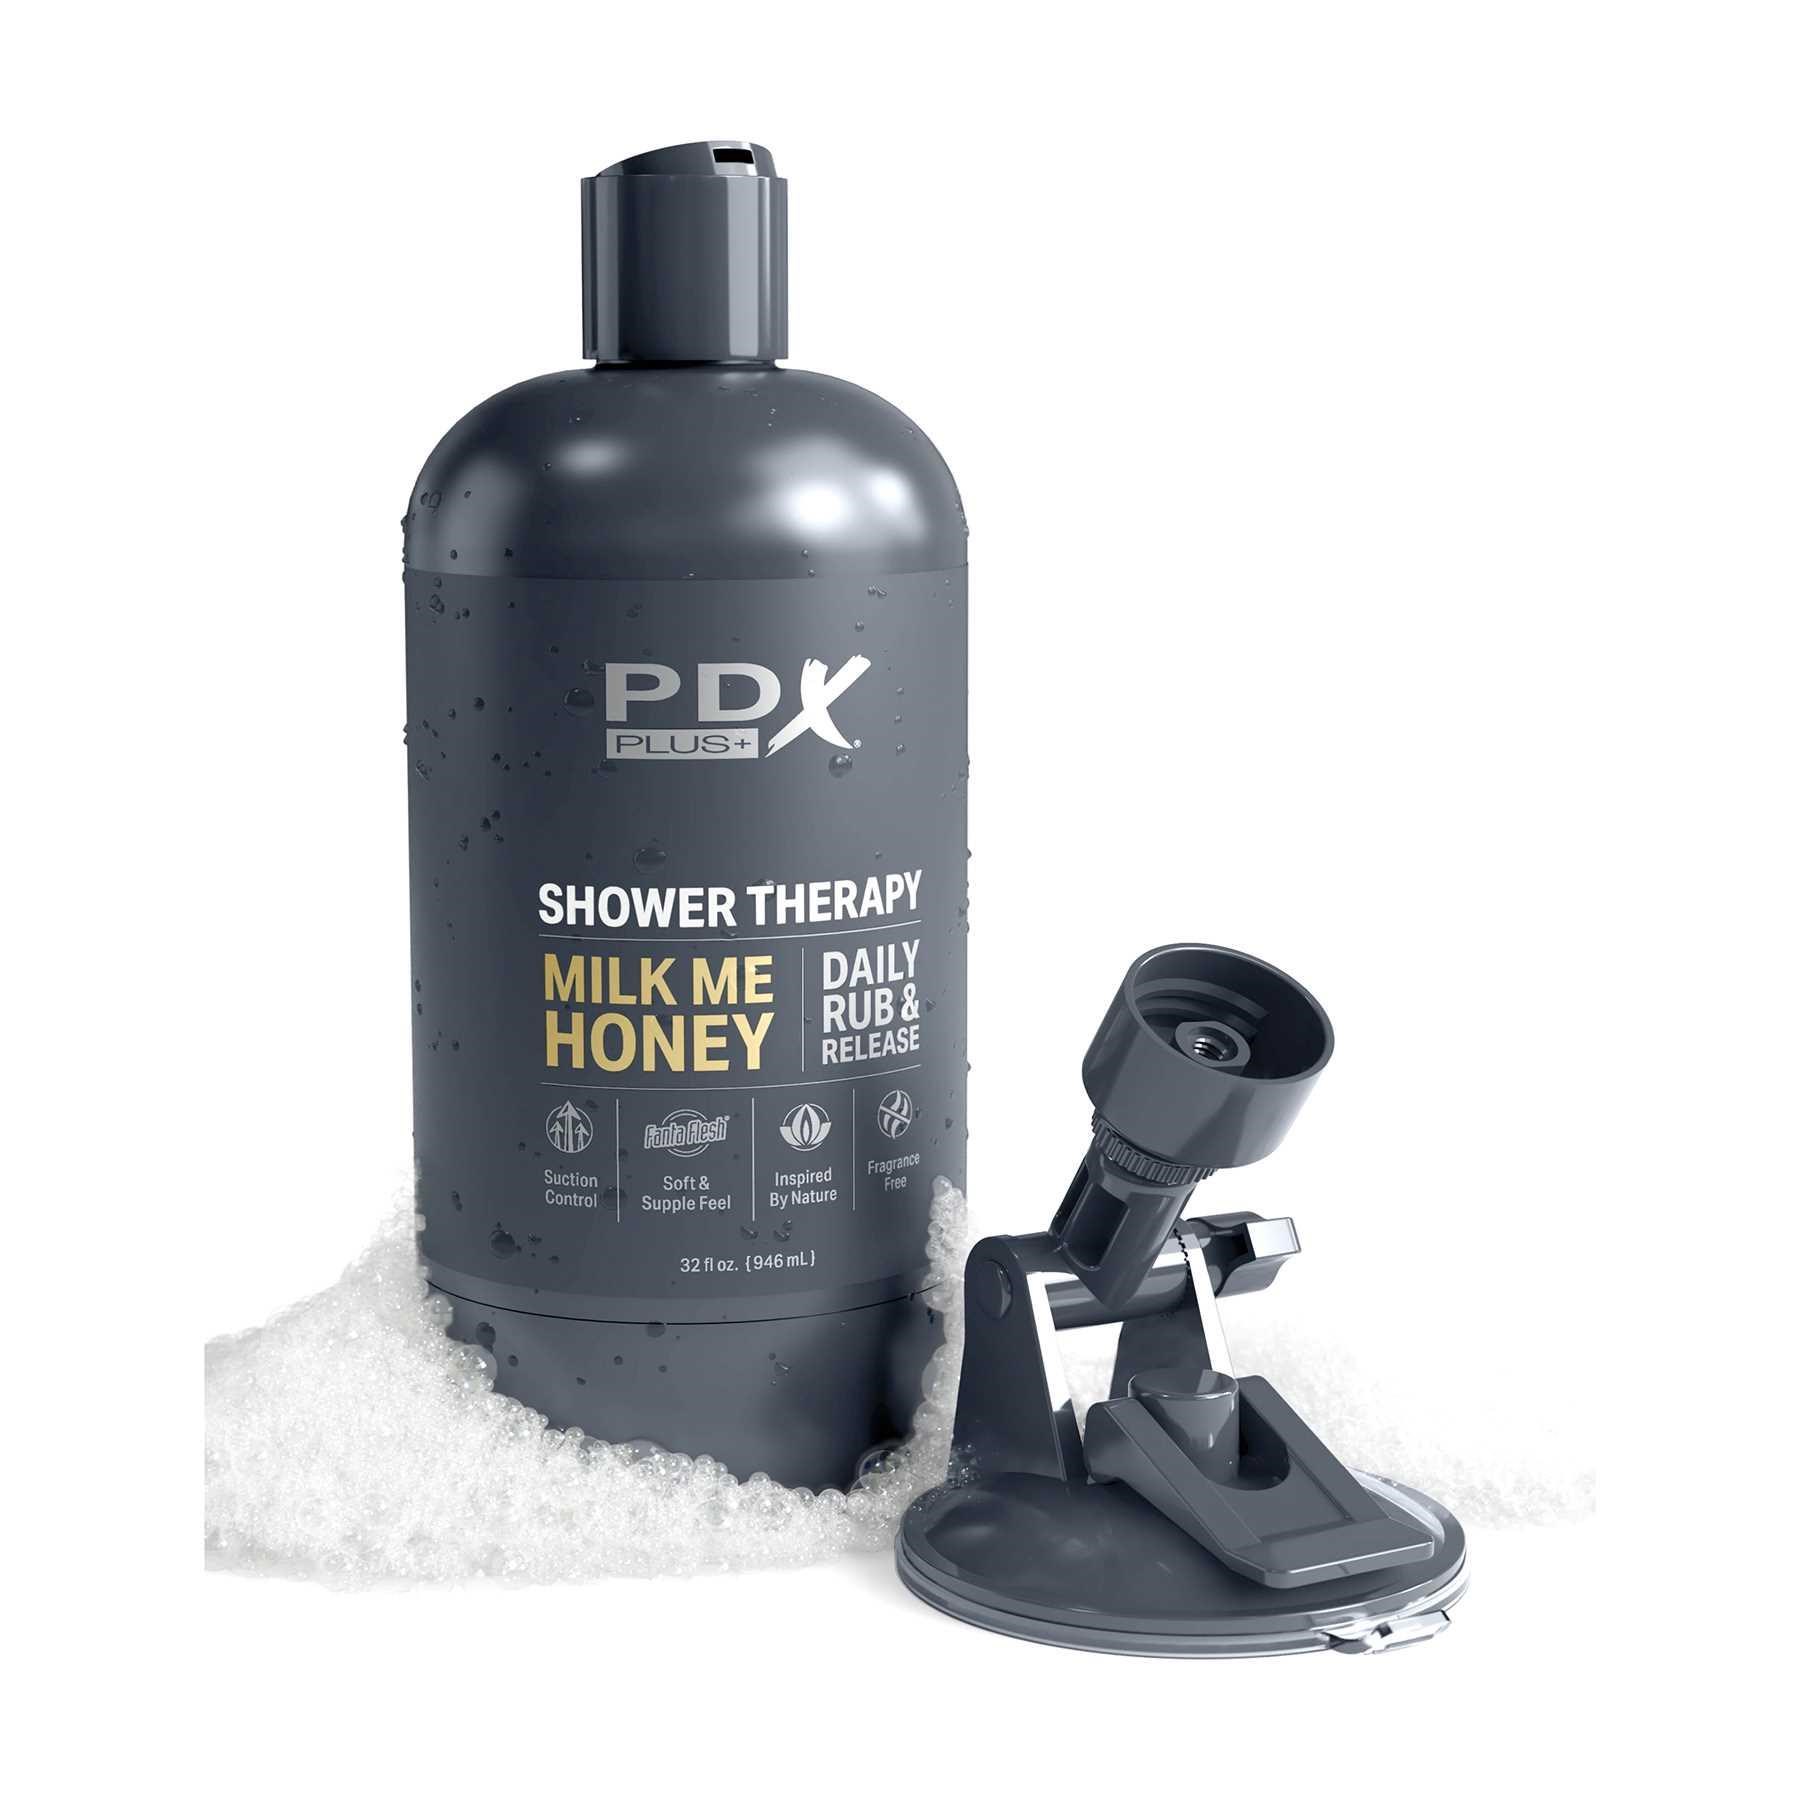 PDX Plus Shower Therapy Milk Me Honey Discreet Stroker brown next to mount